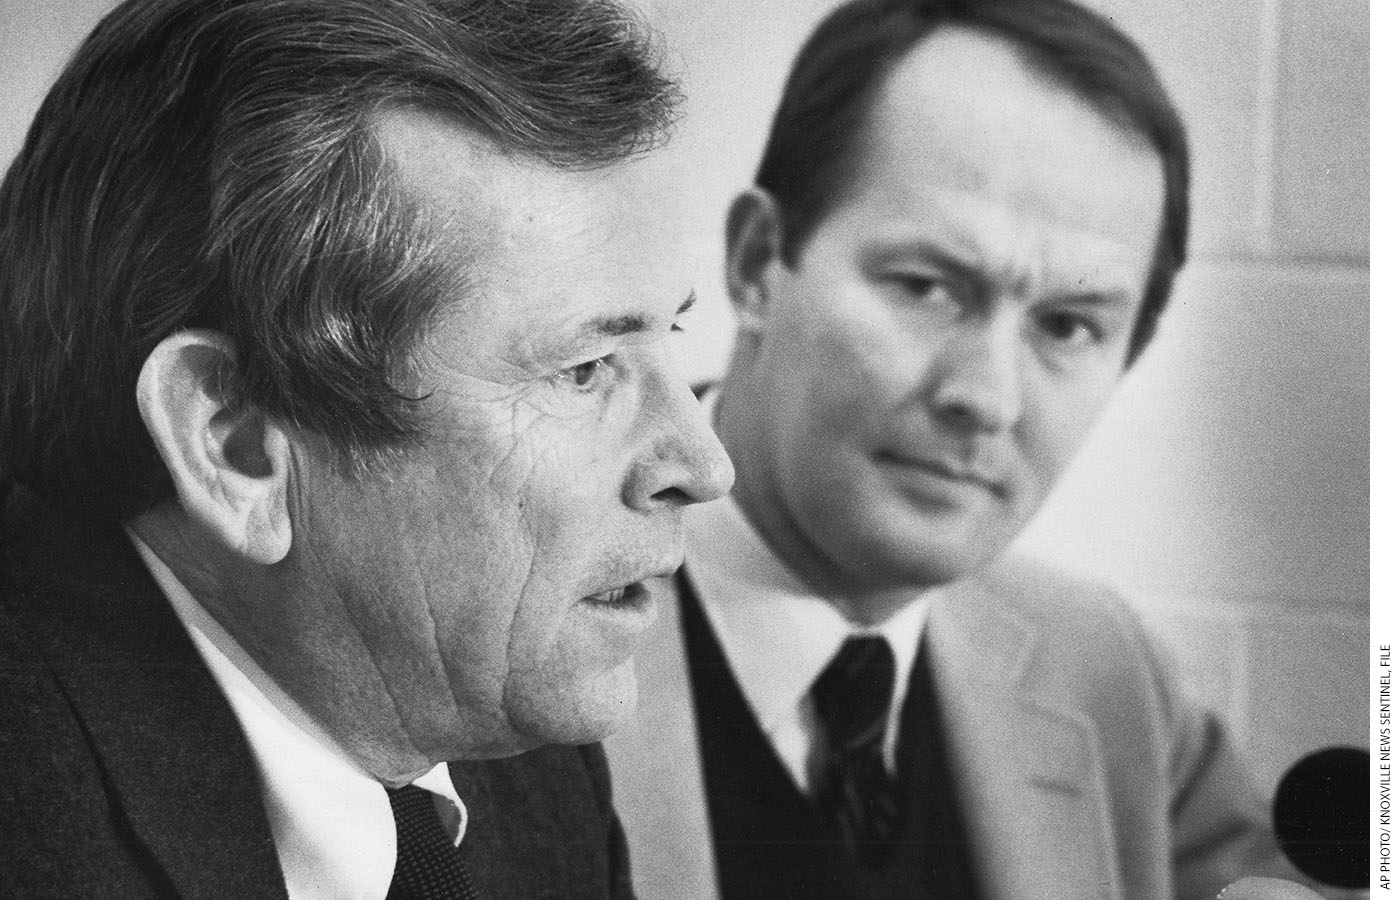 Senator Howard H. Baker, Jr., and then-governor Alexander meet the press at the annual Lincoln Day Dinner in Knoxville, Tennessee, February 11, 1982.